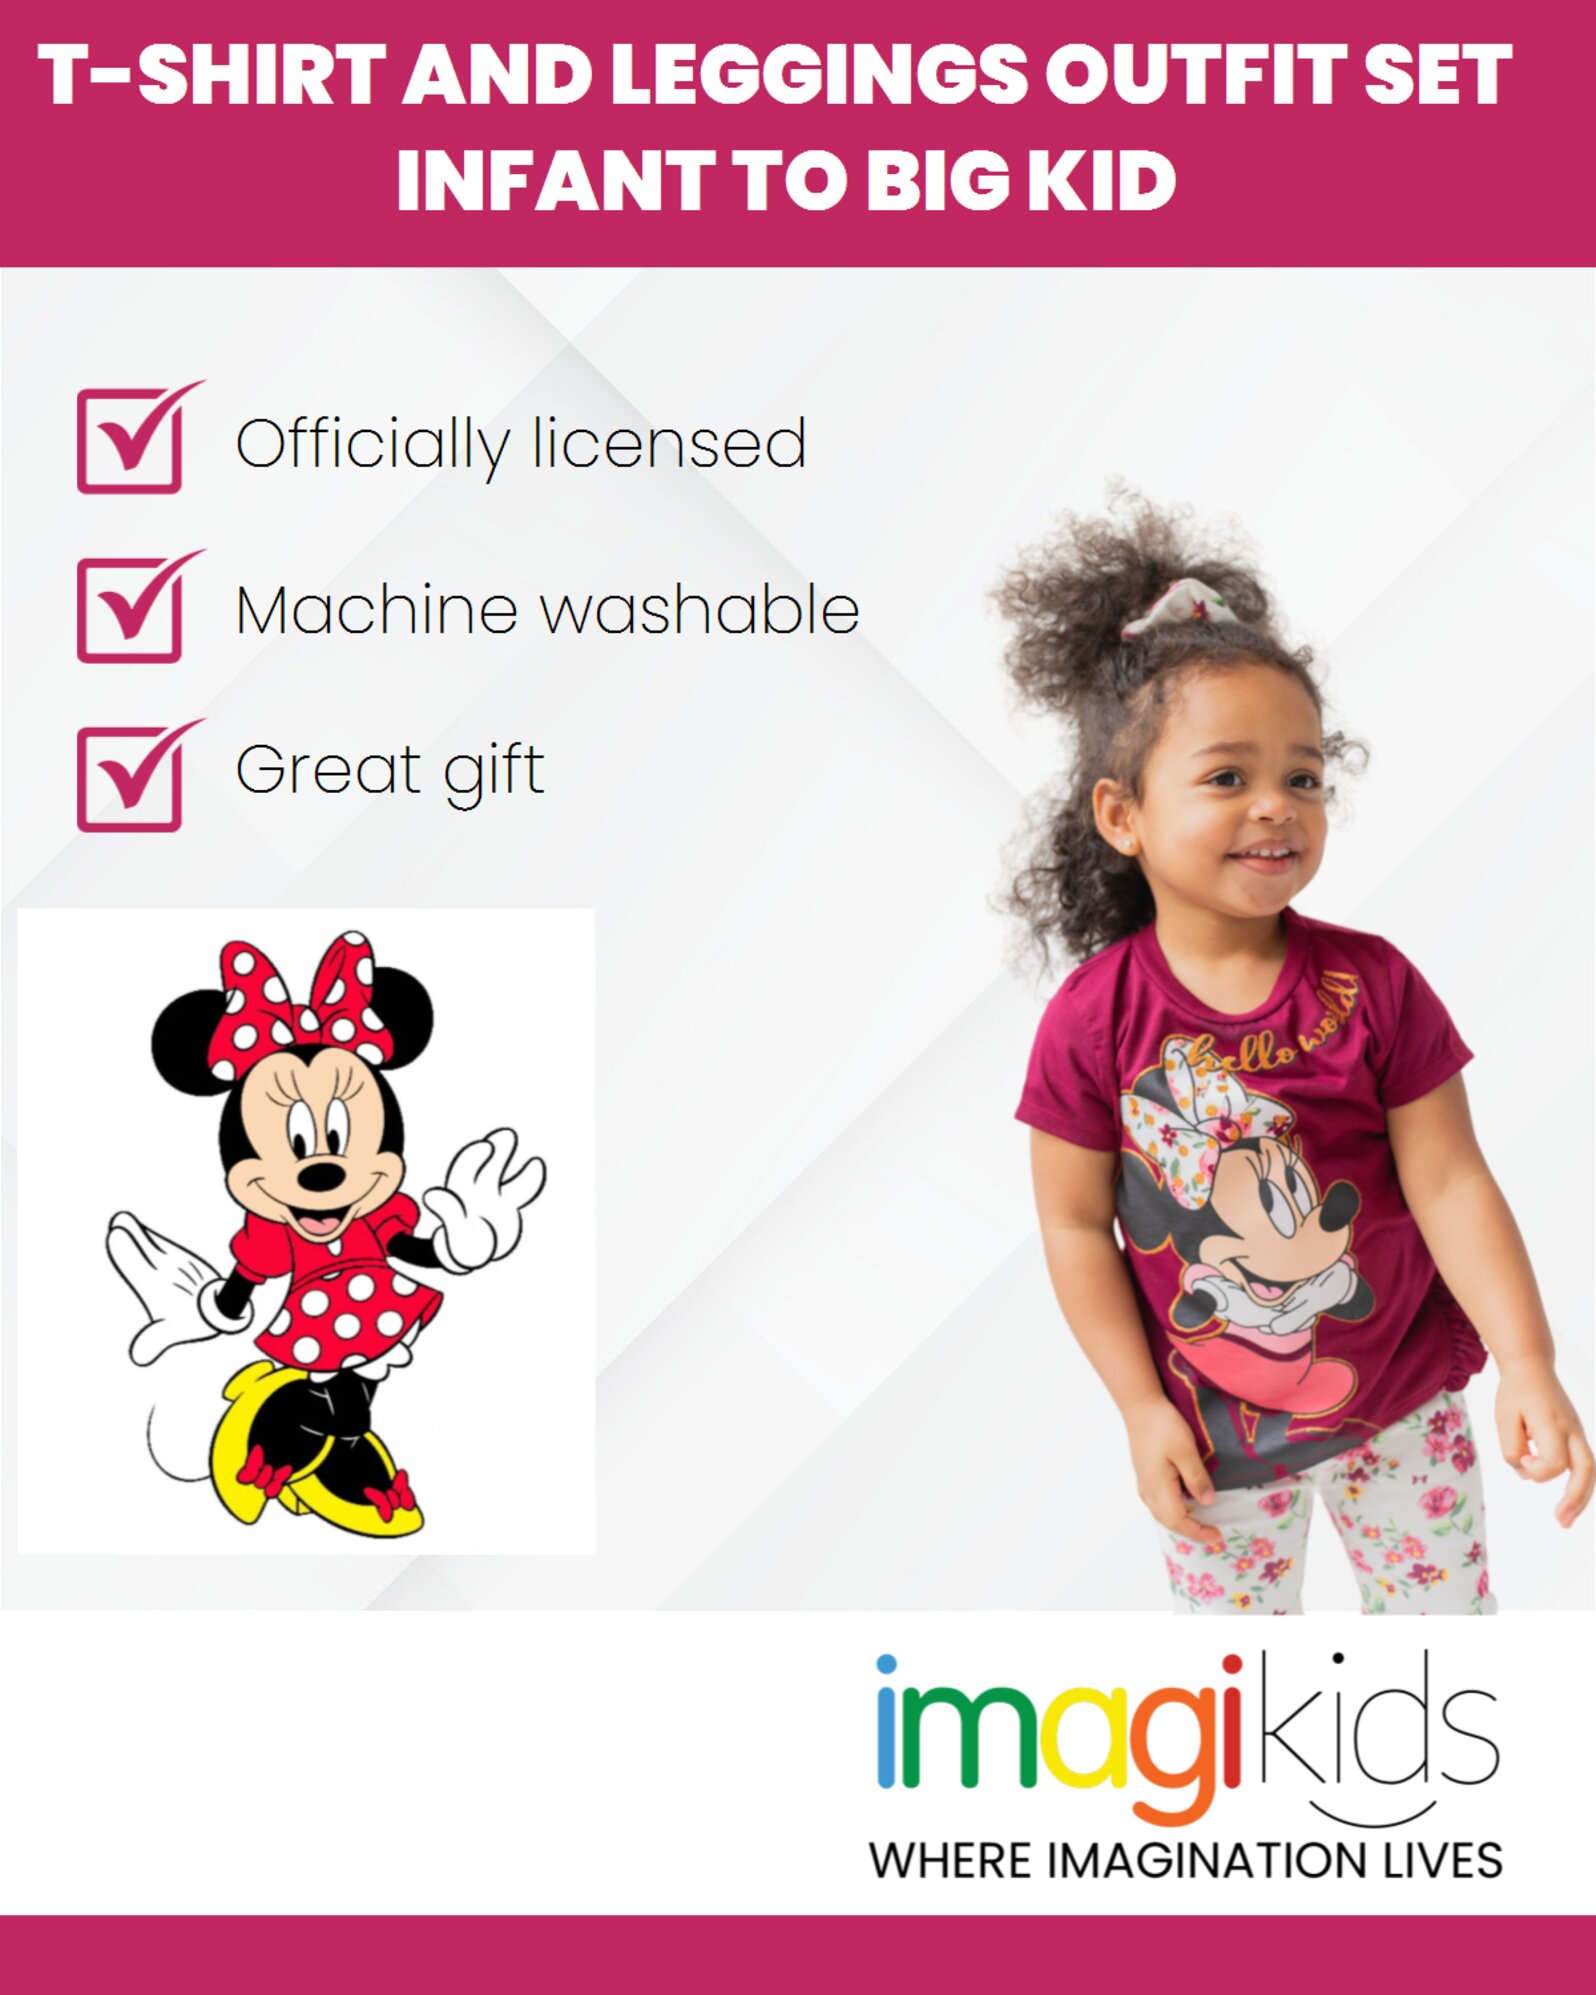 Disney Minnie Mouse Infant Baby Girls T-Shirt and Leggings Outfit Set Infant to Little Kid - image 3 of 5